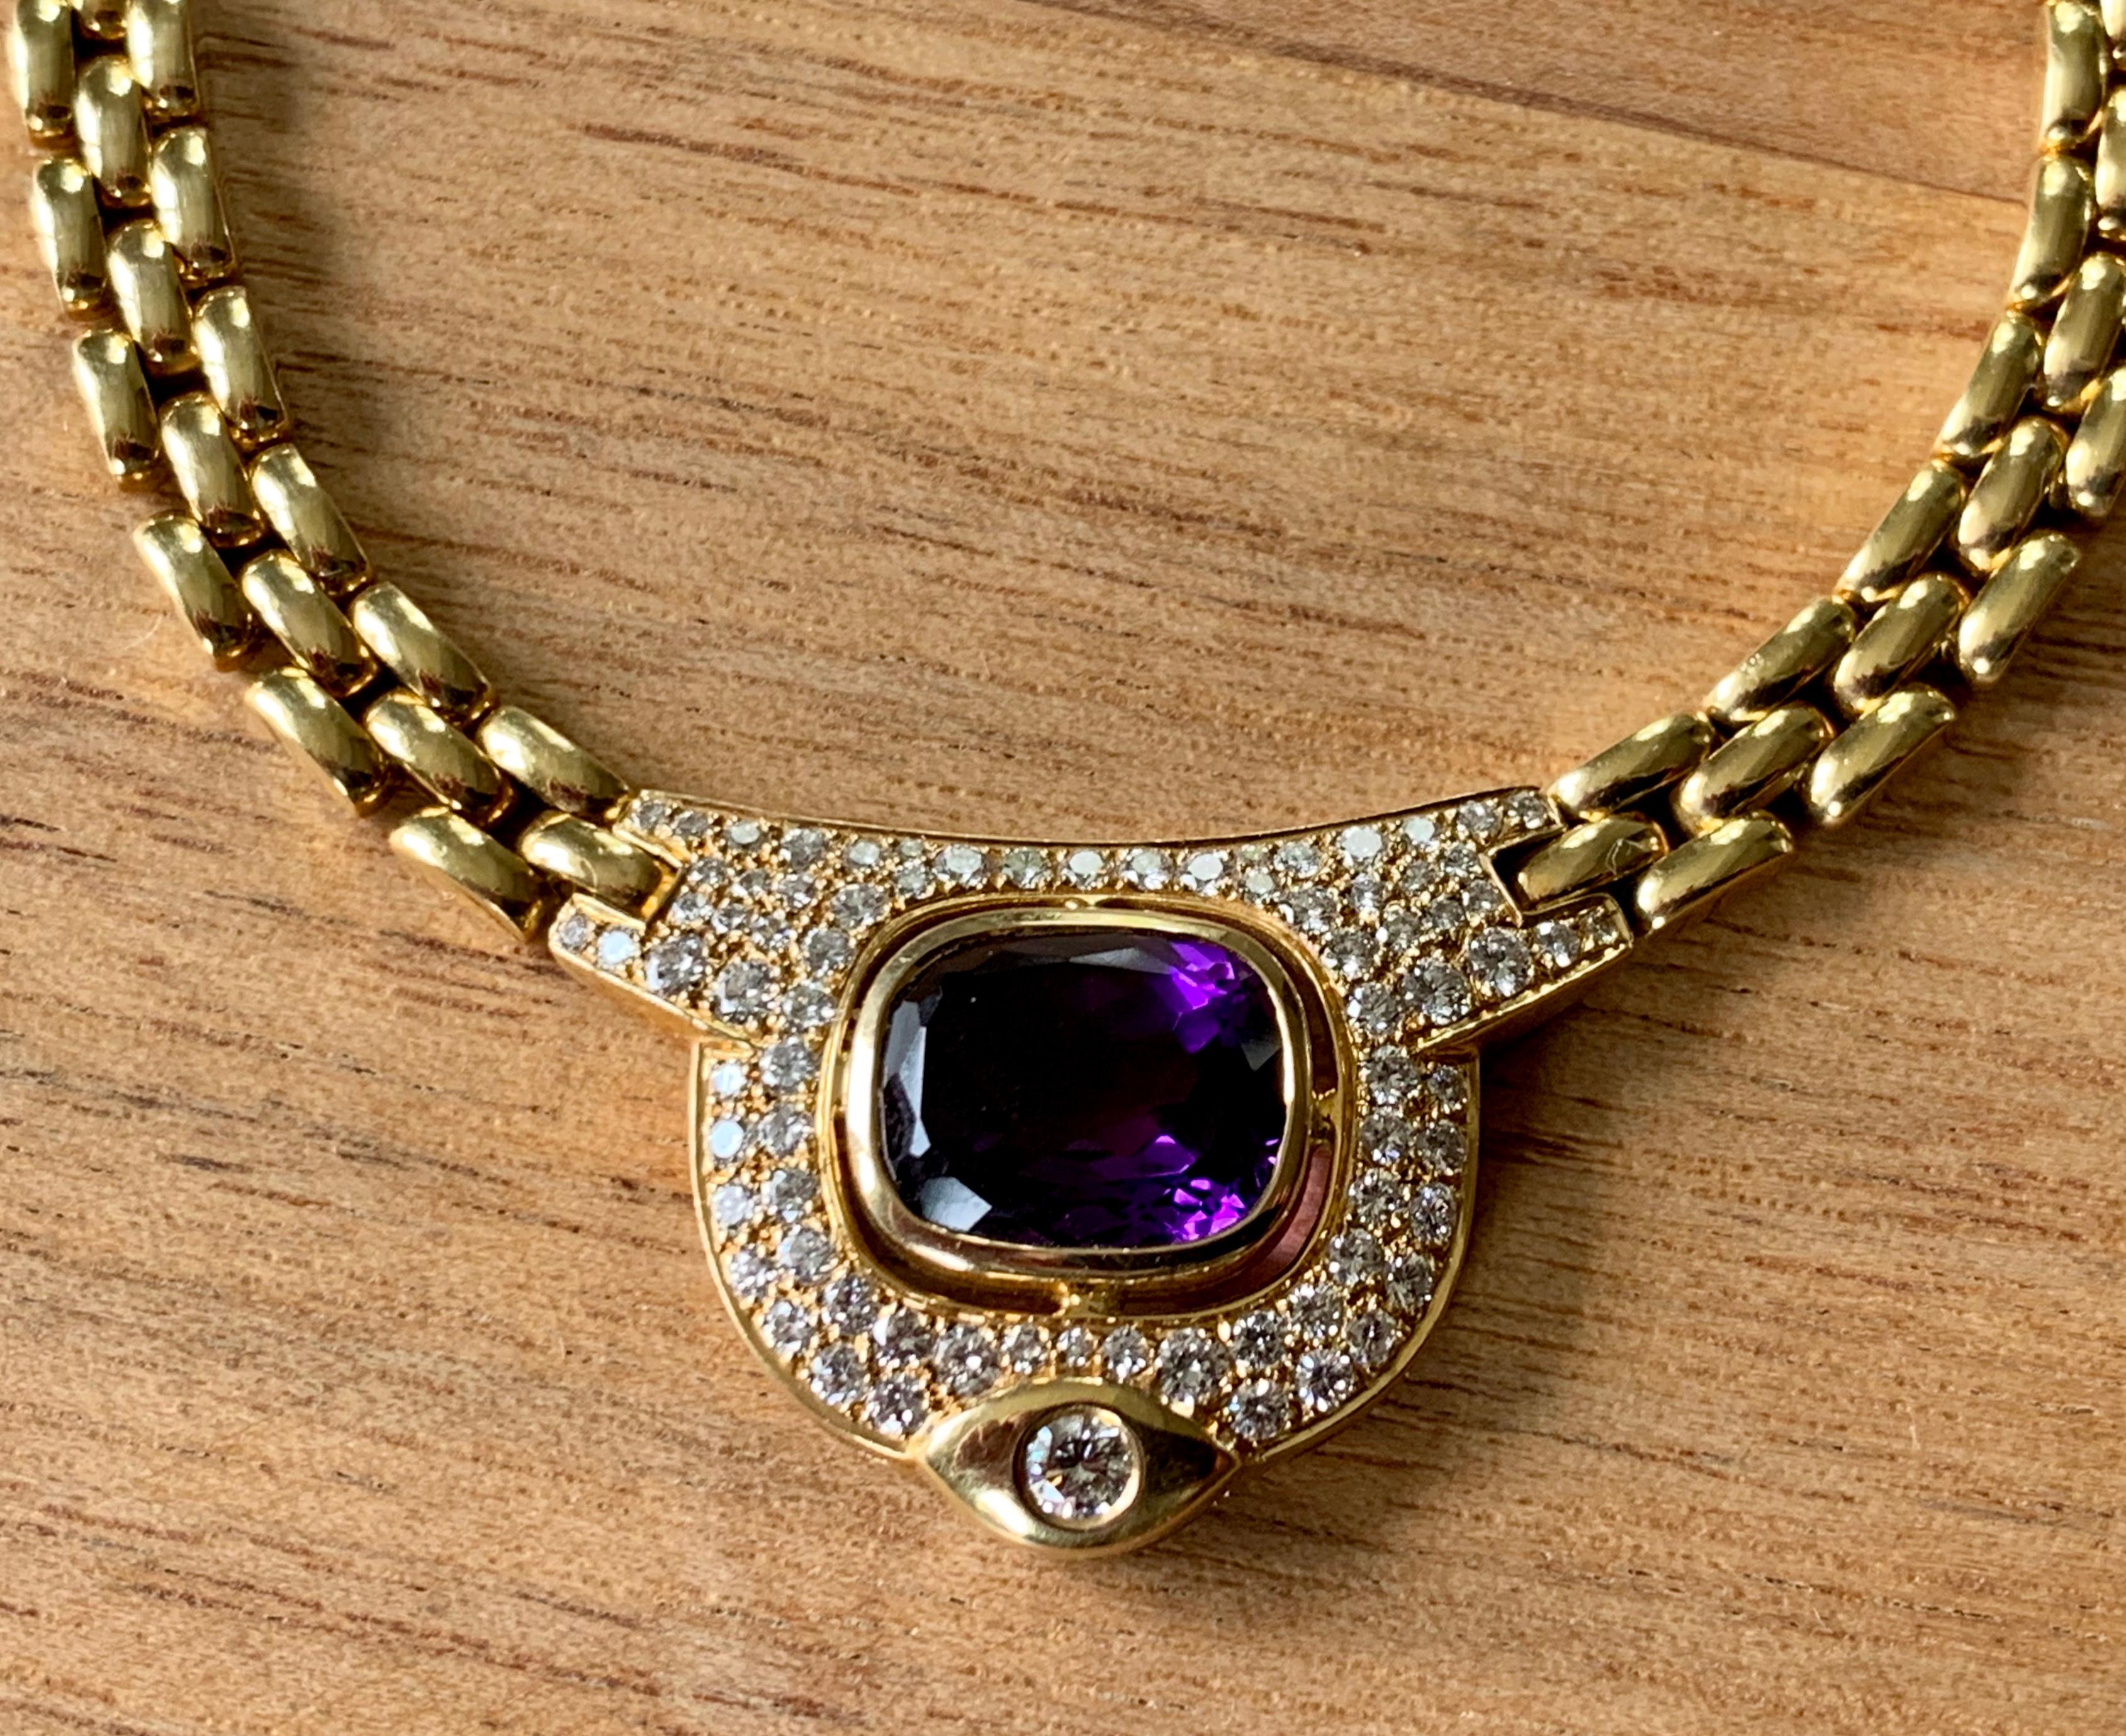 Women's or Men's Vintage 18 K Gold Link Chain Necklace with Amethyst and Diamonds by Kurz Zurich For Sale